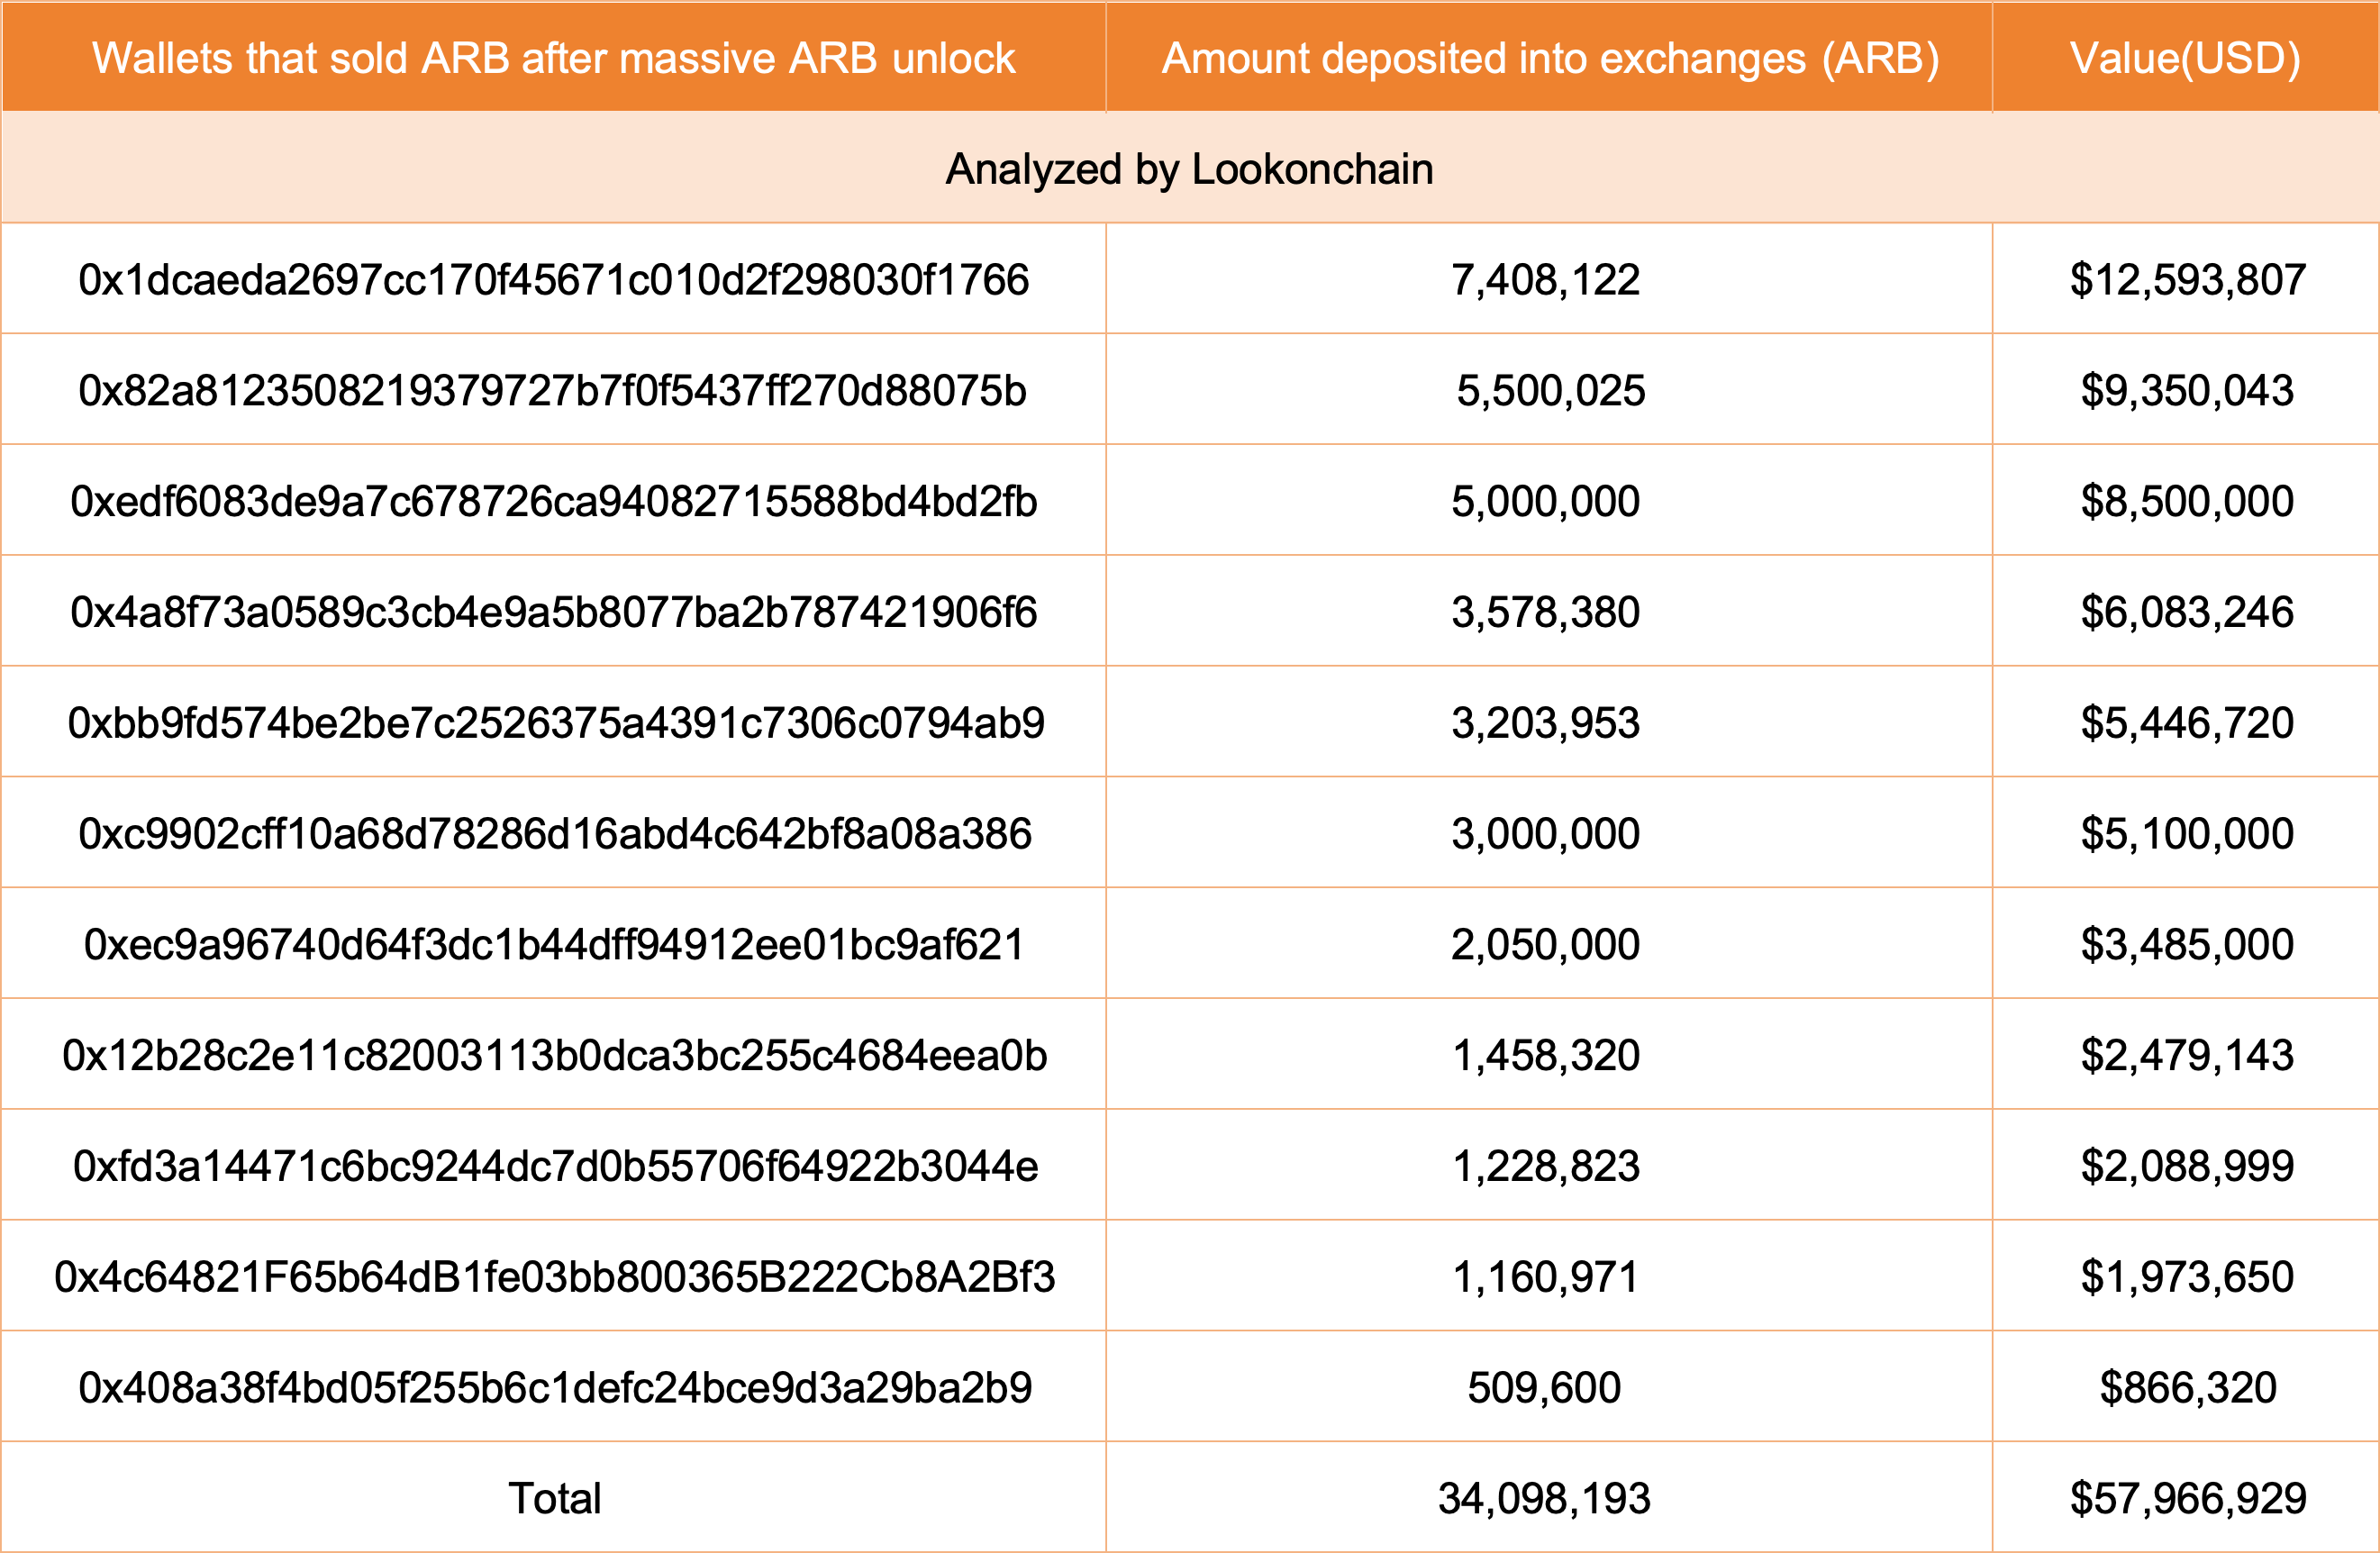 Whales Deposit About $58,000,000 Worth of Arbitrum (ARB) to Crypto Exchanges After Token Unlock